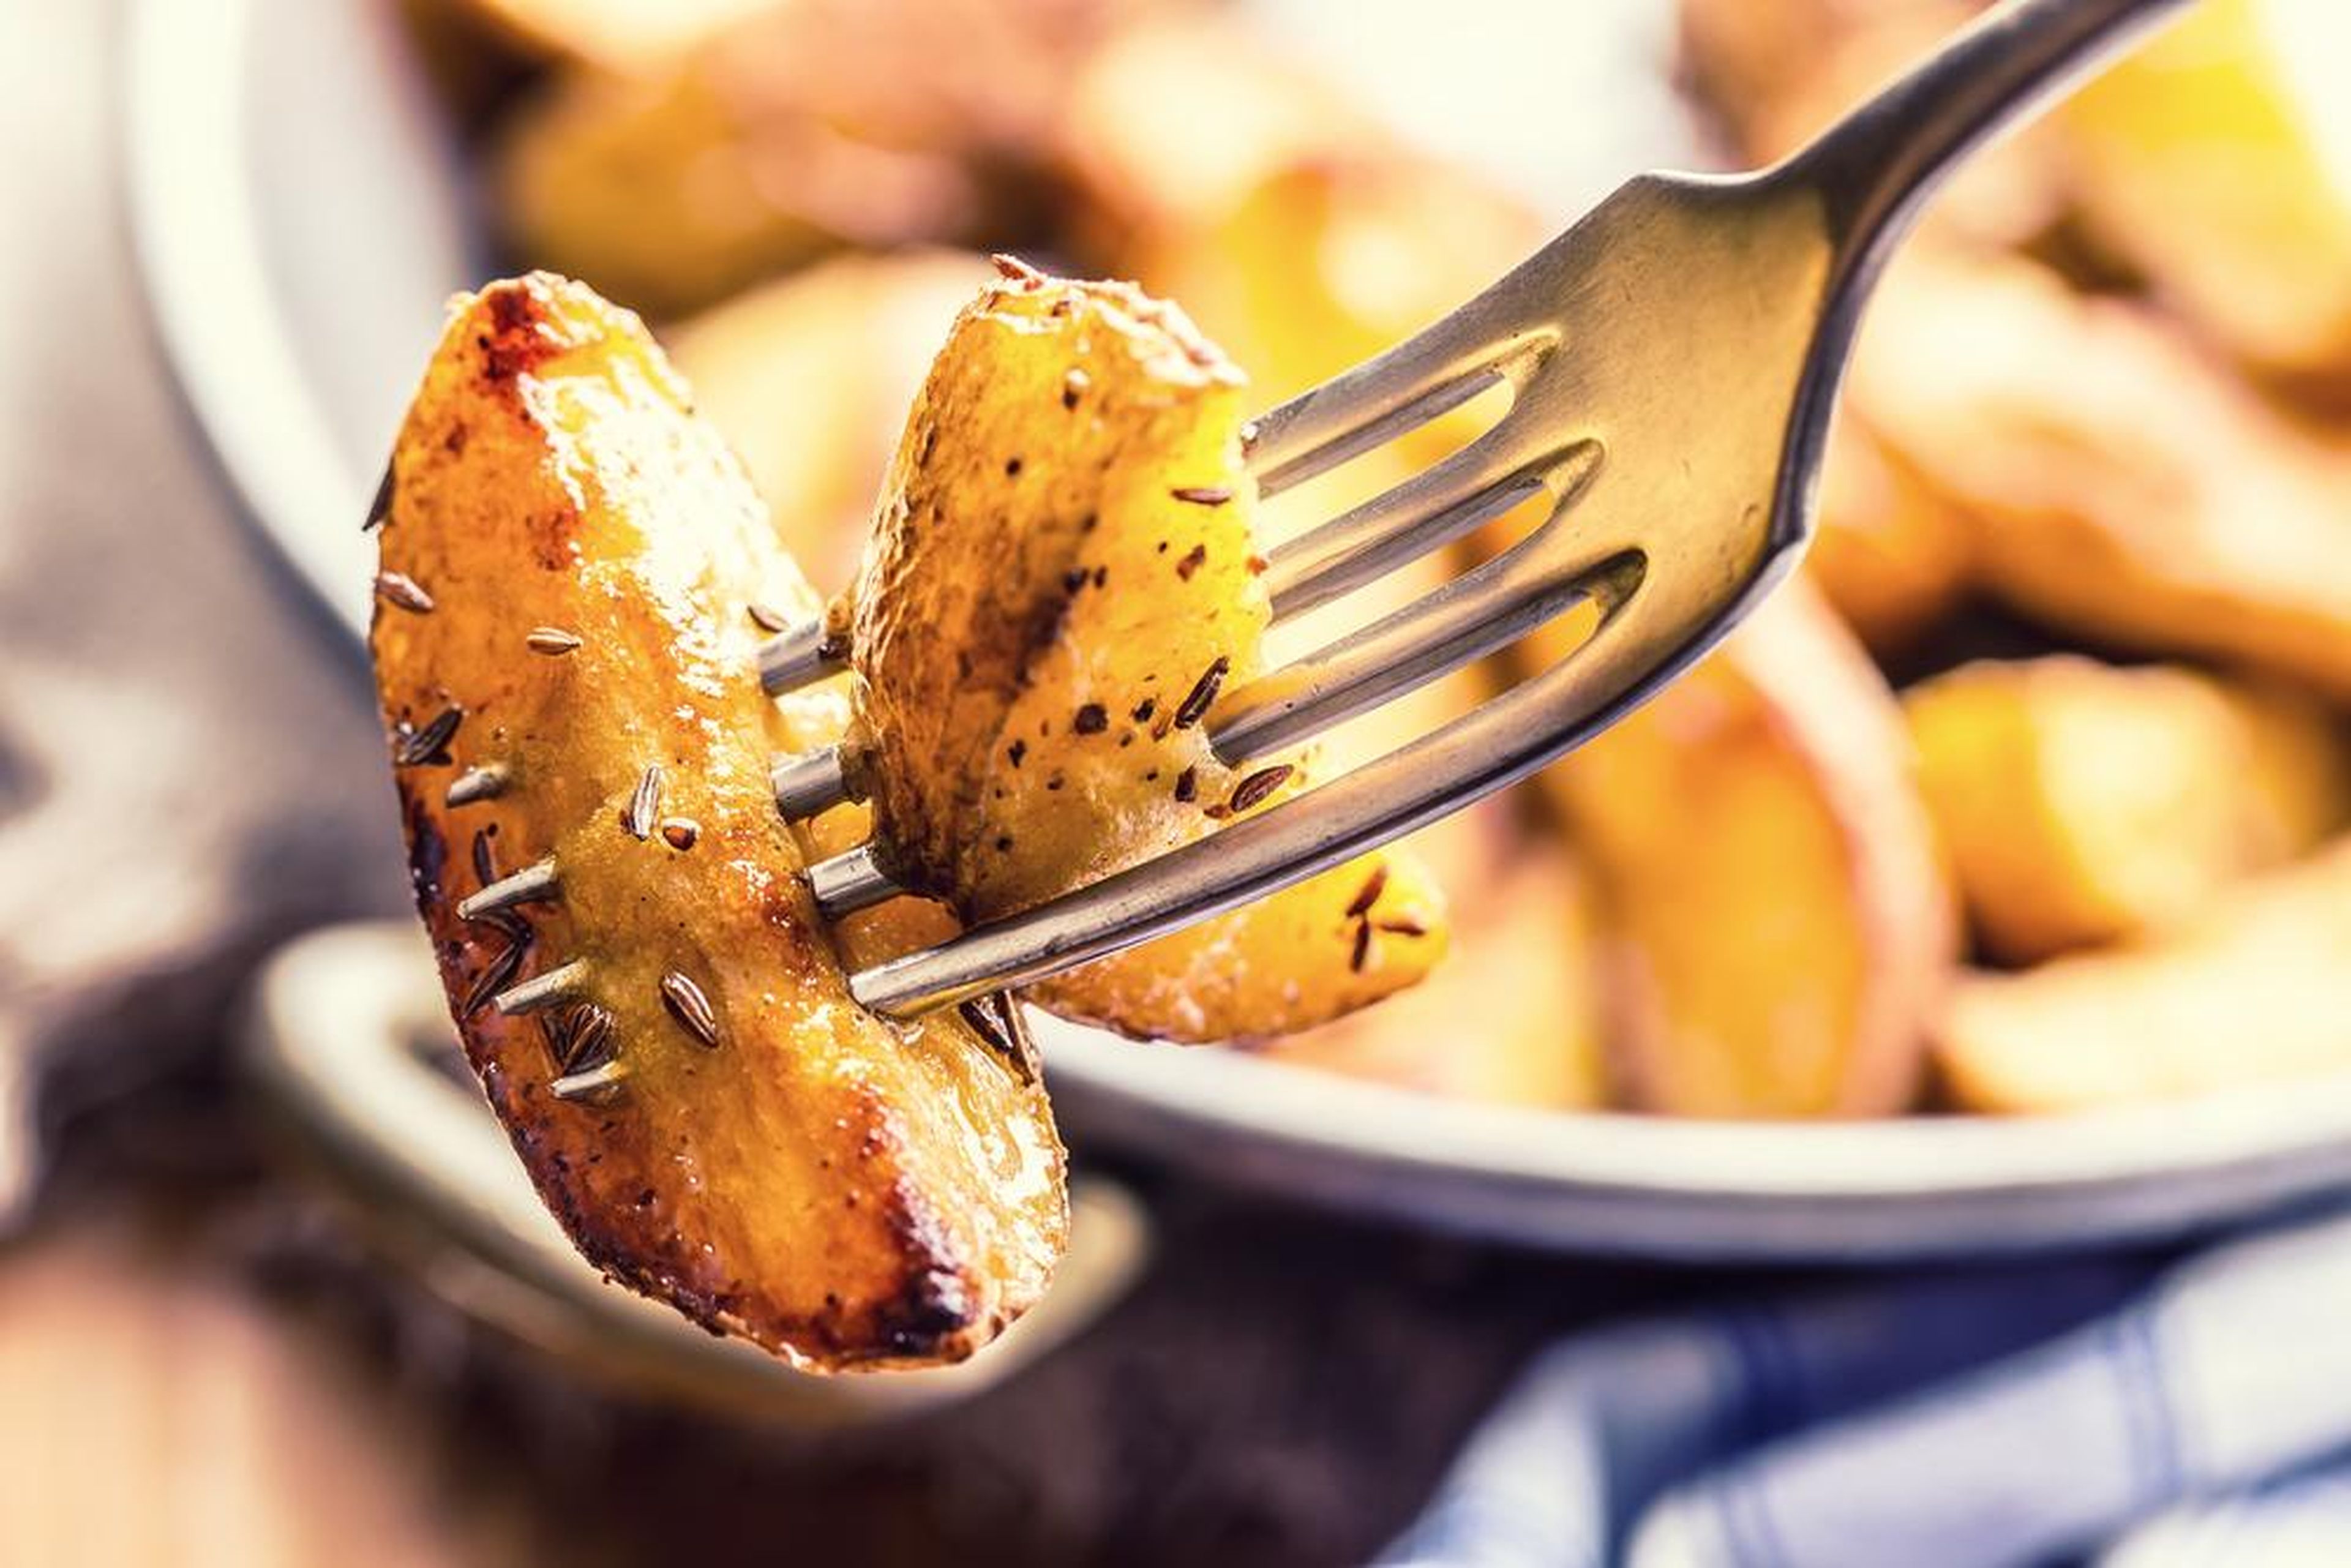 Potatoes aren't always thought of as a health food, but they are full of nutrients.